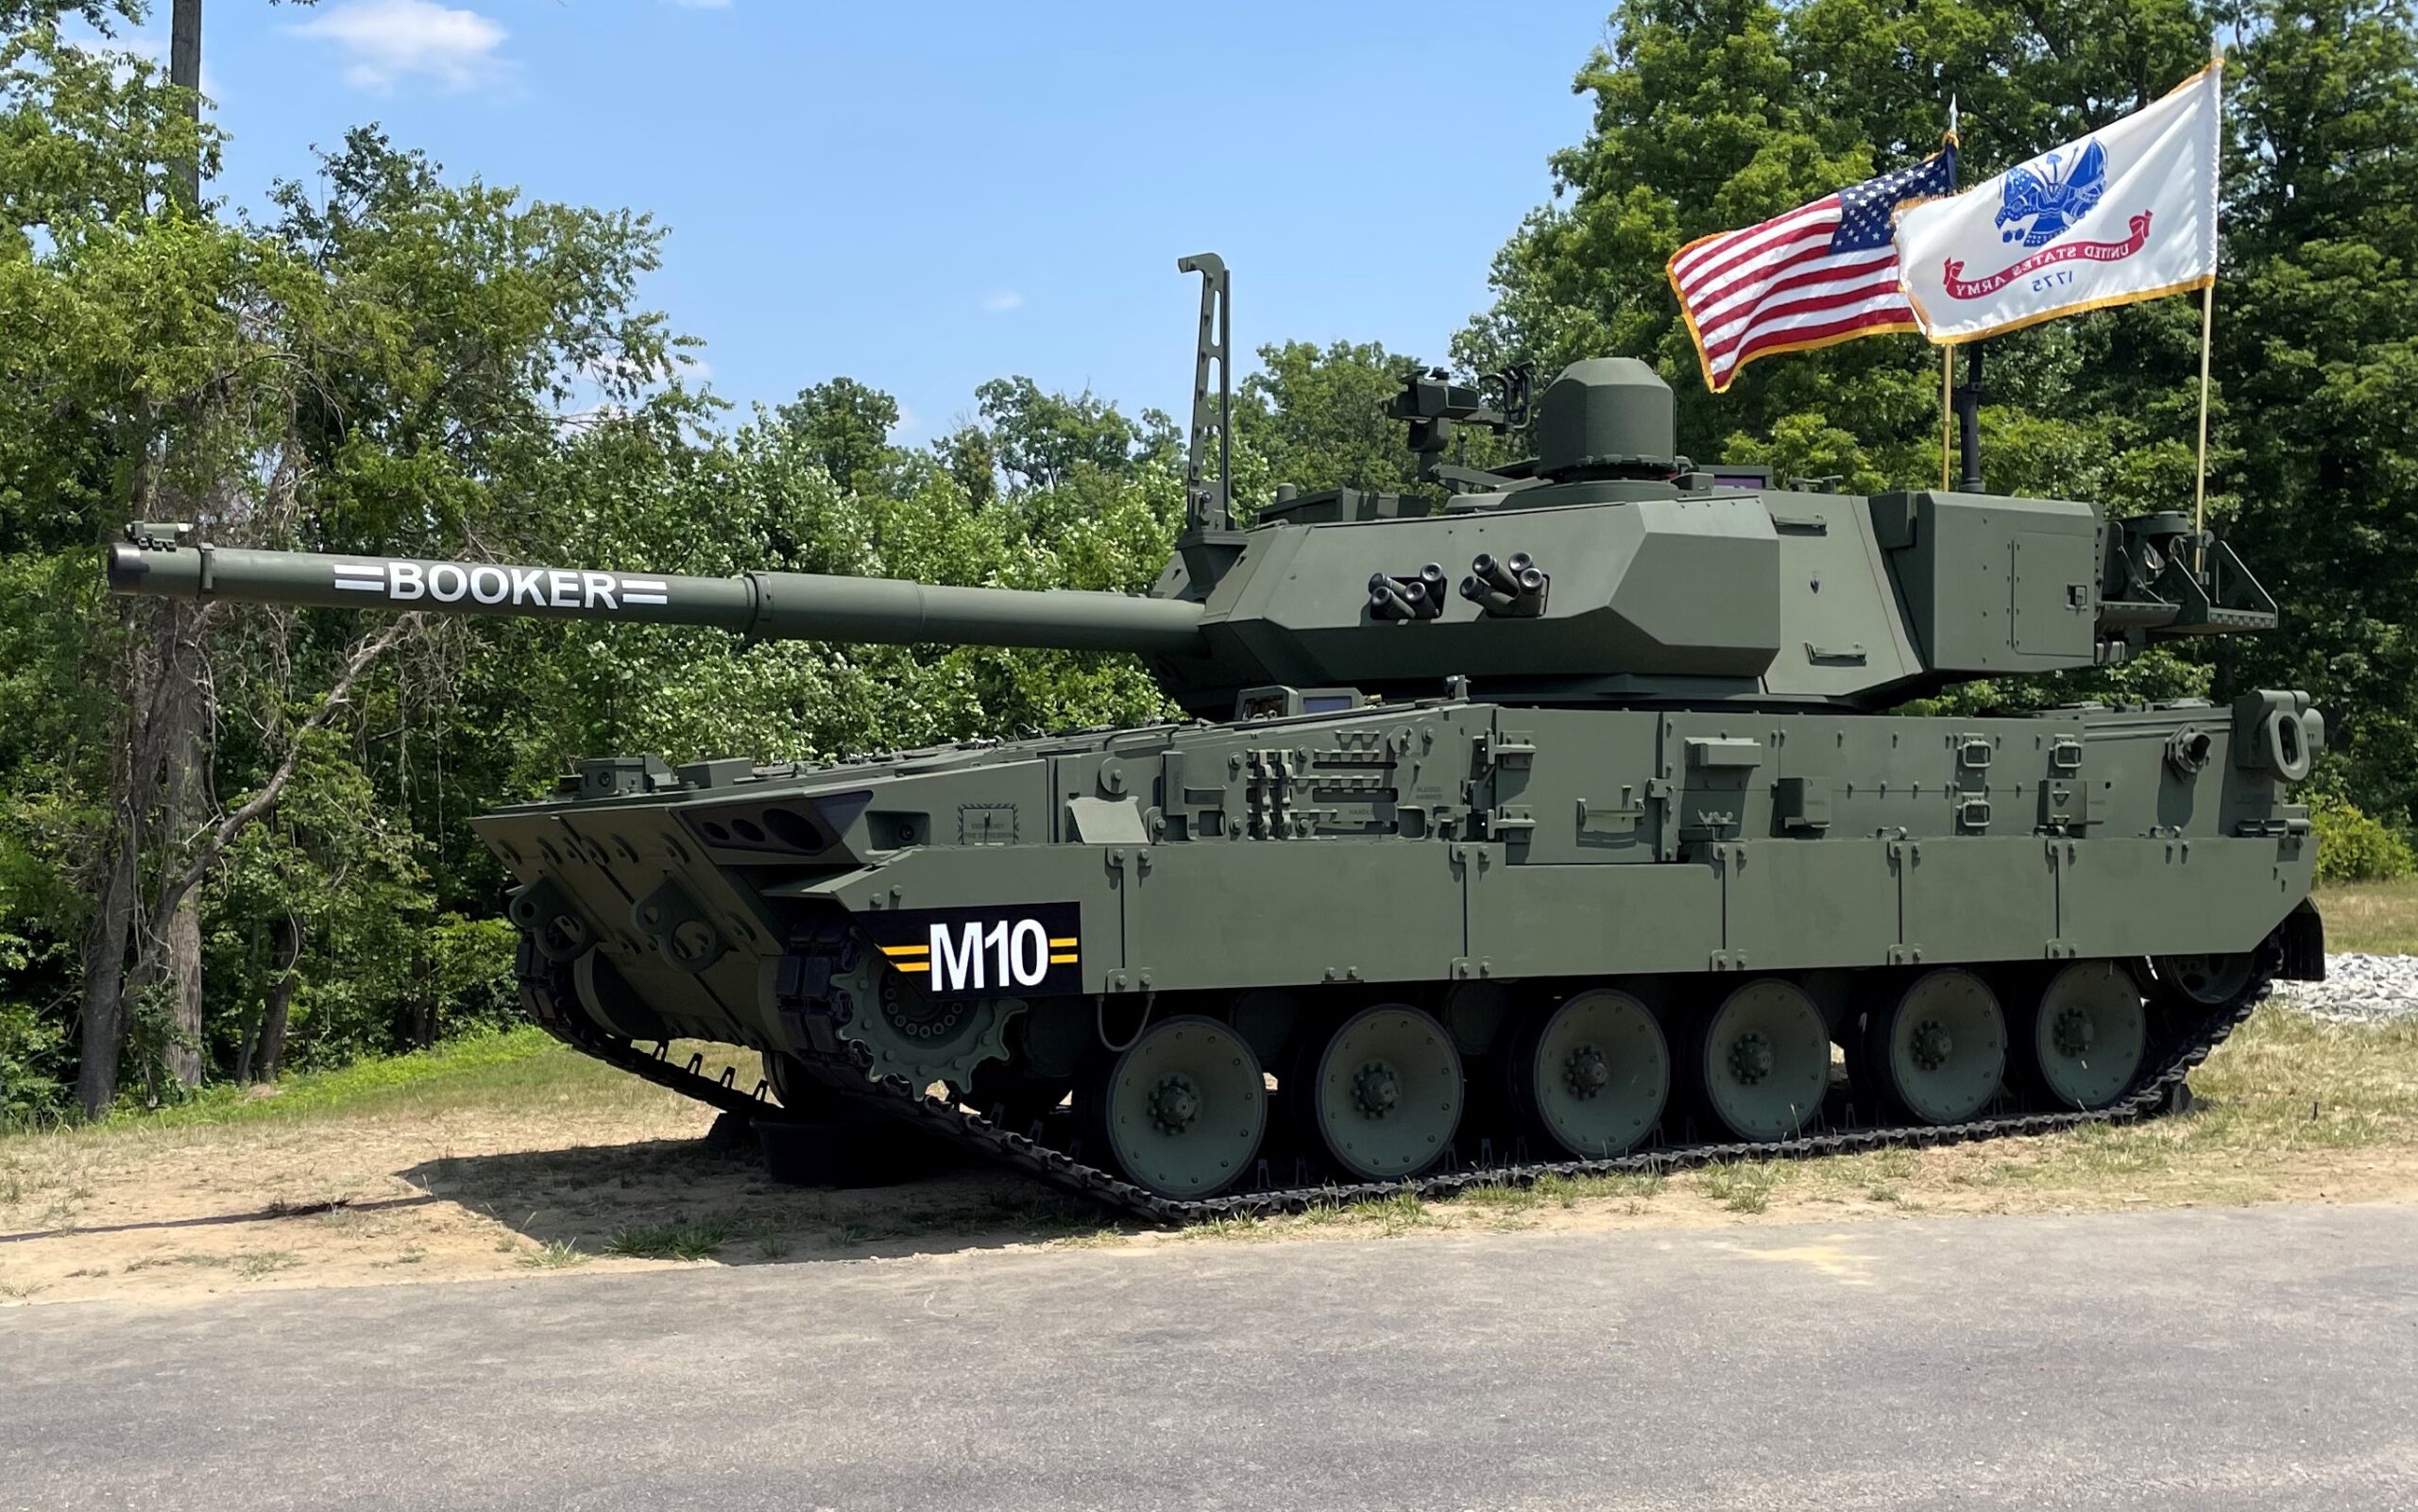 General Dynamics Land Systems Awarded $258 Million by U.S. Army for 26 Additional M10 Booker Combat Vehicles – General Dynamics Land Systems